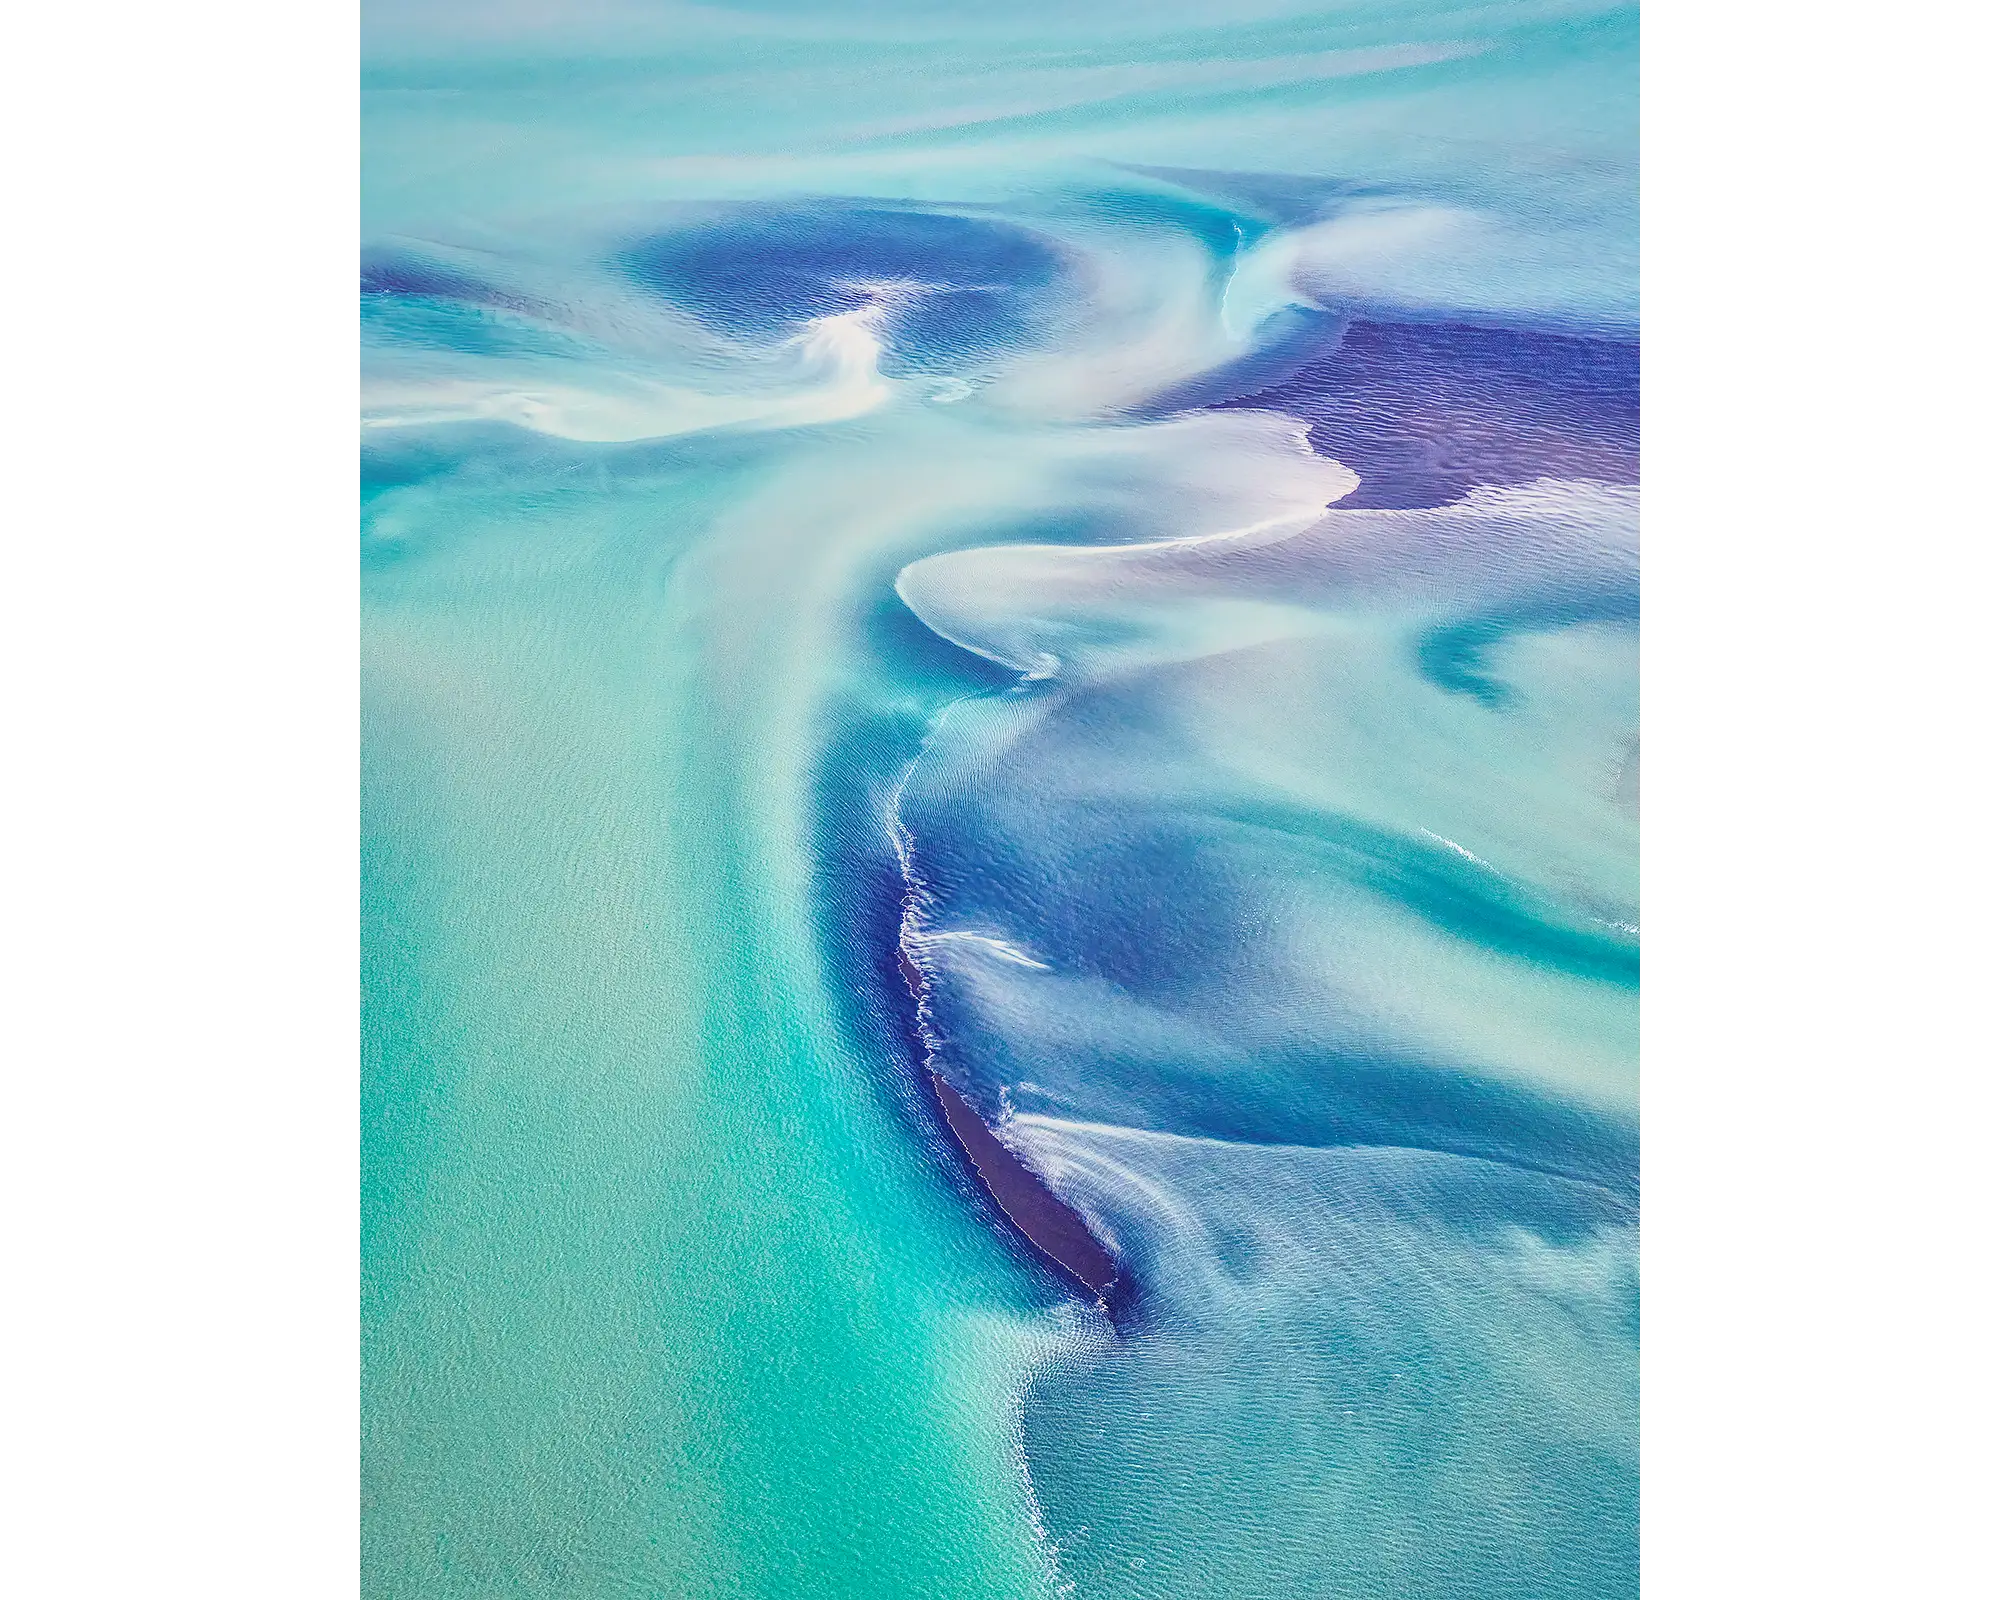 Permeate - Colours and patterns from a king tide in the Kimberley, Western Australia.